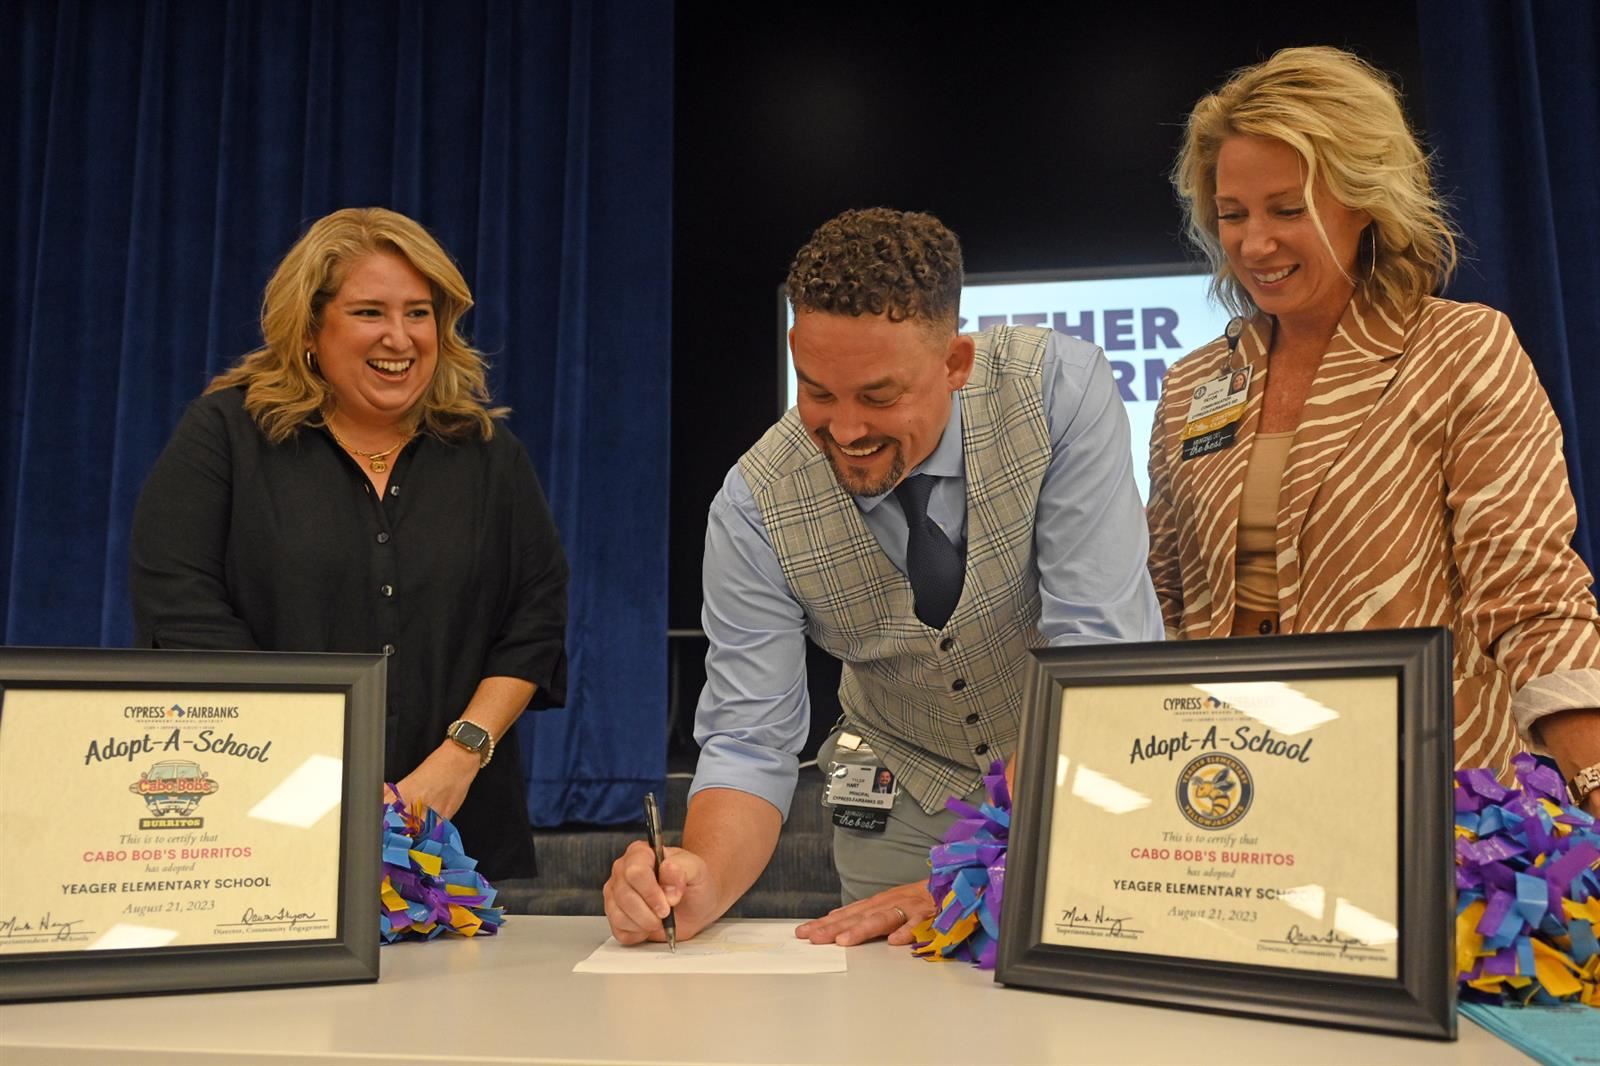 Tyler Hart, Yeager Elementary School principal, signs an Adopt-a-School partnership agreement.